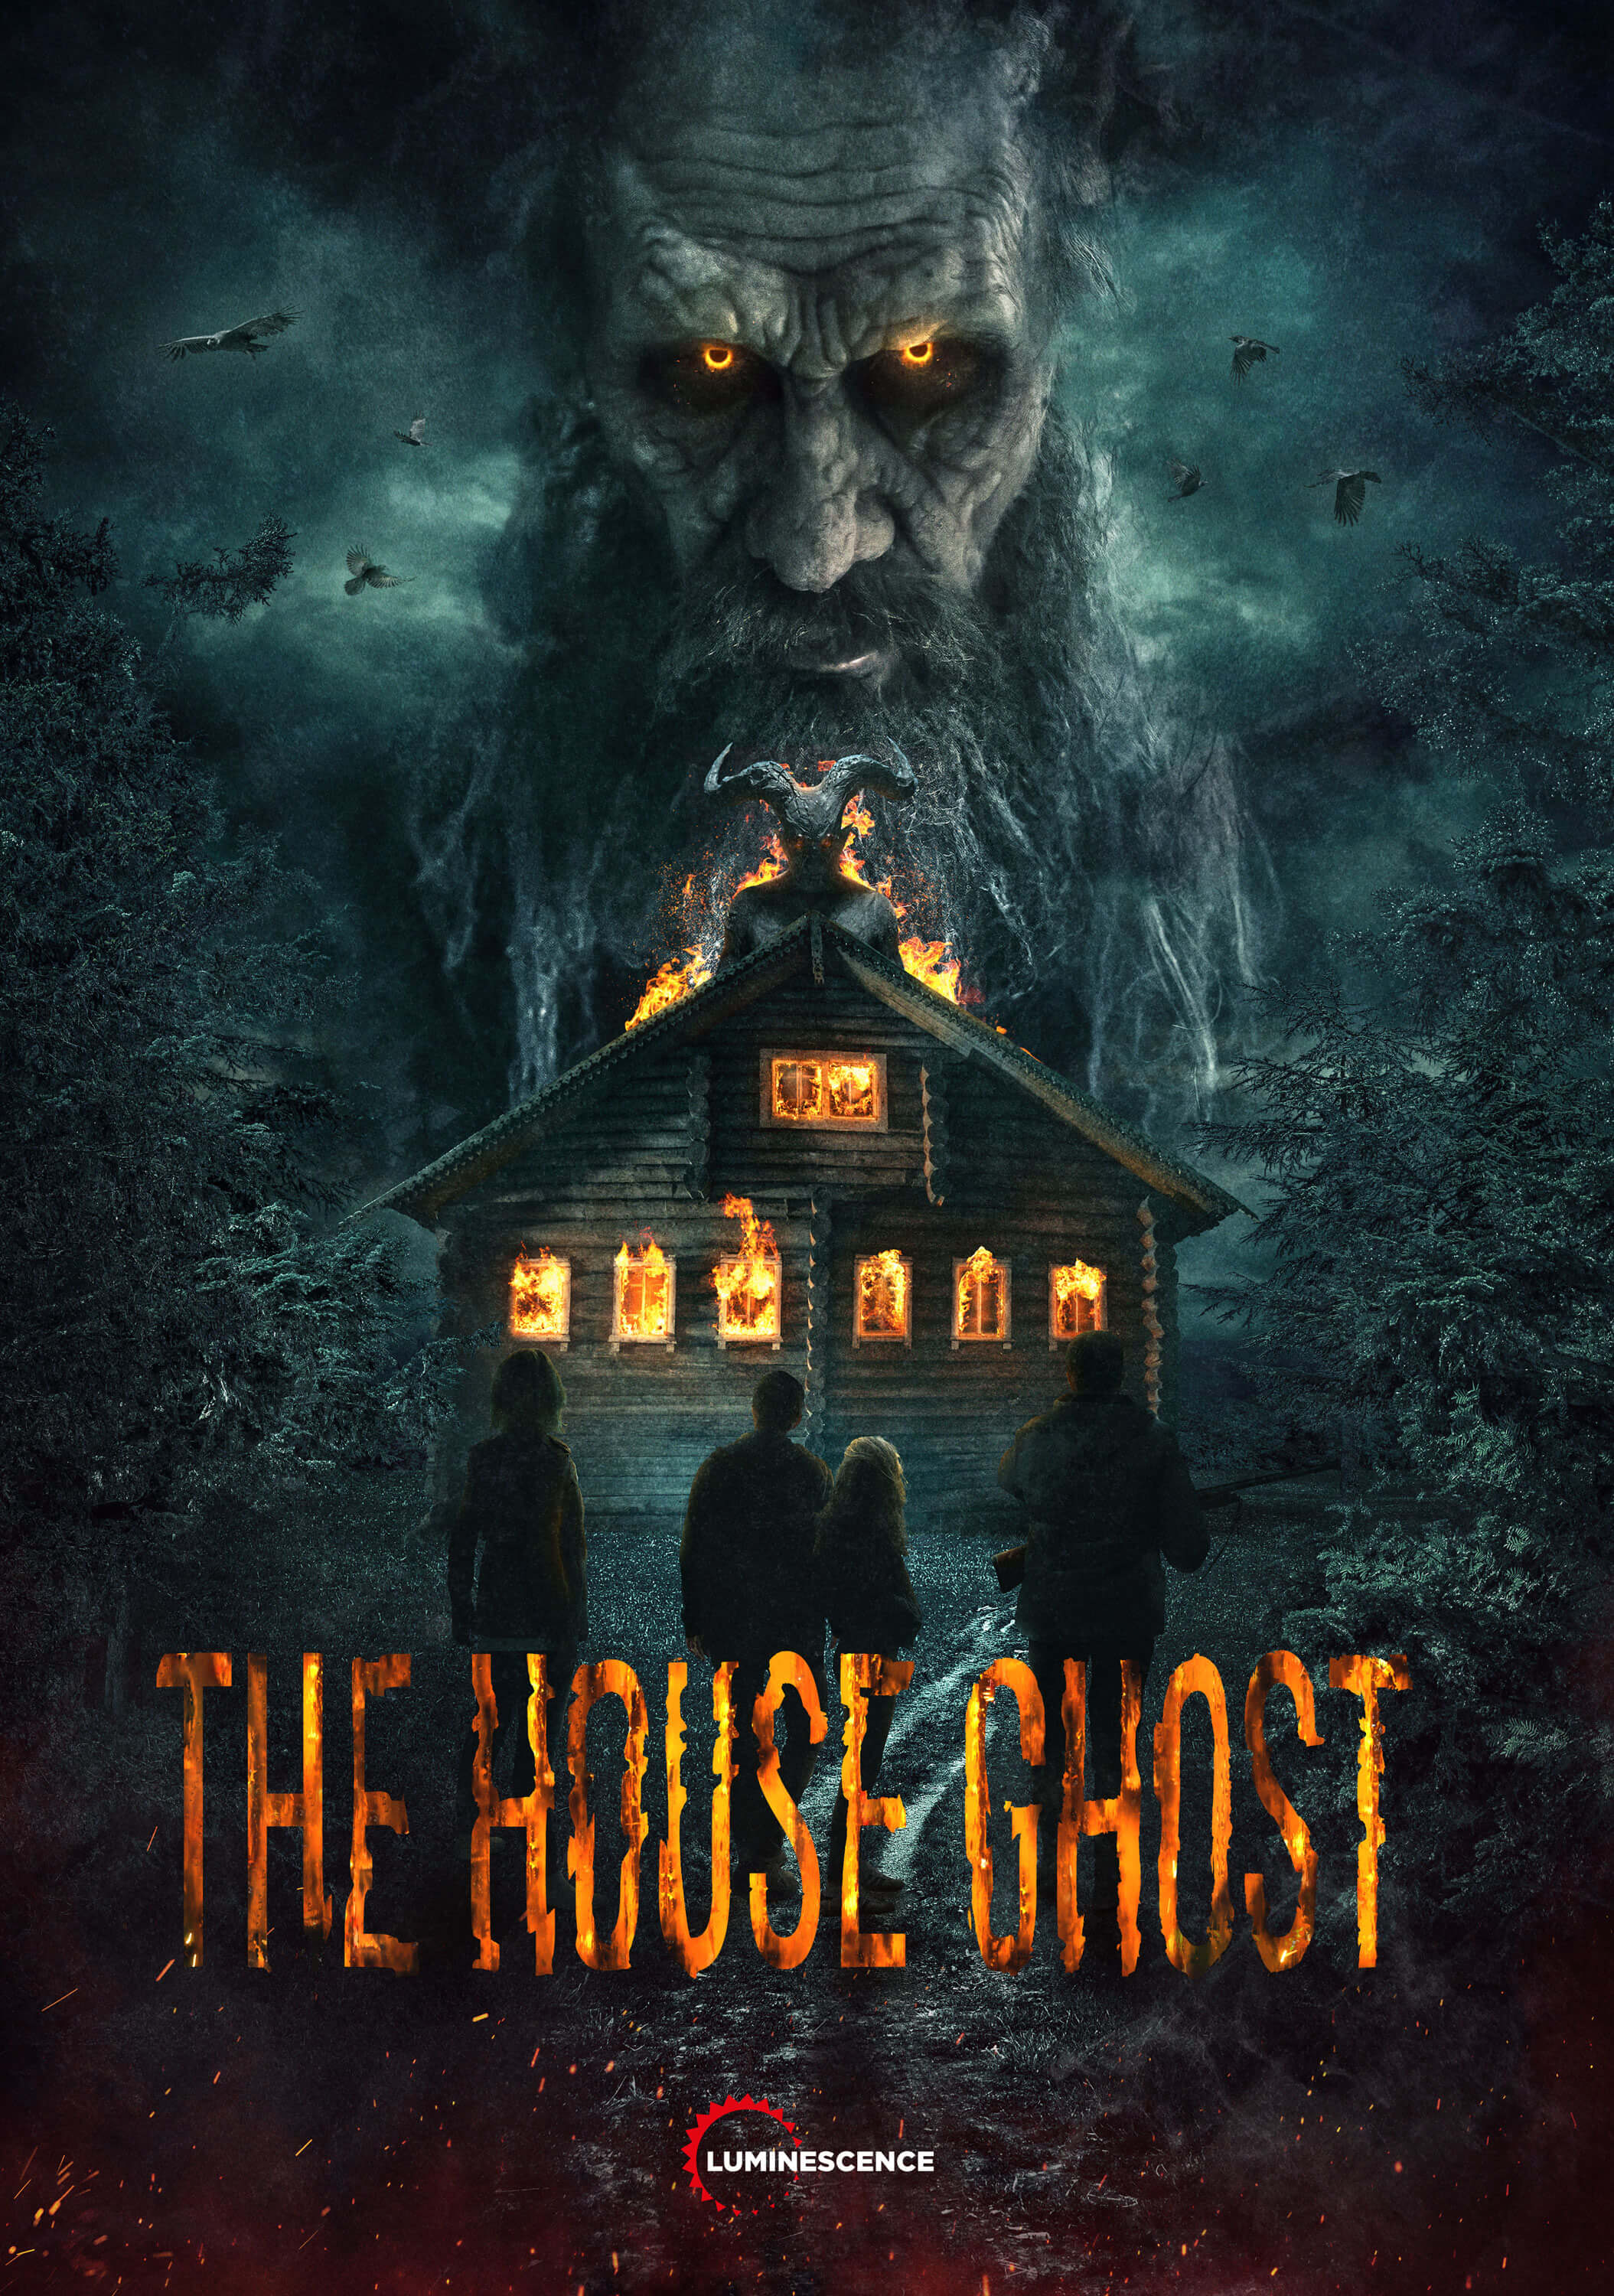 The House Ghost